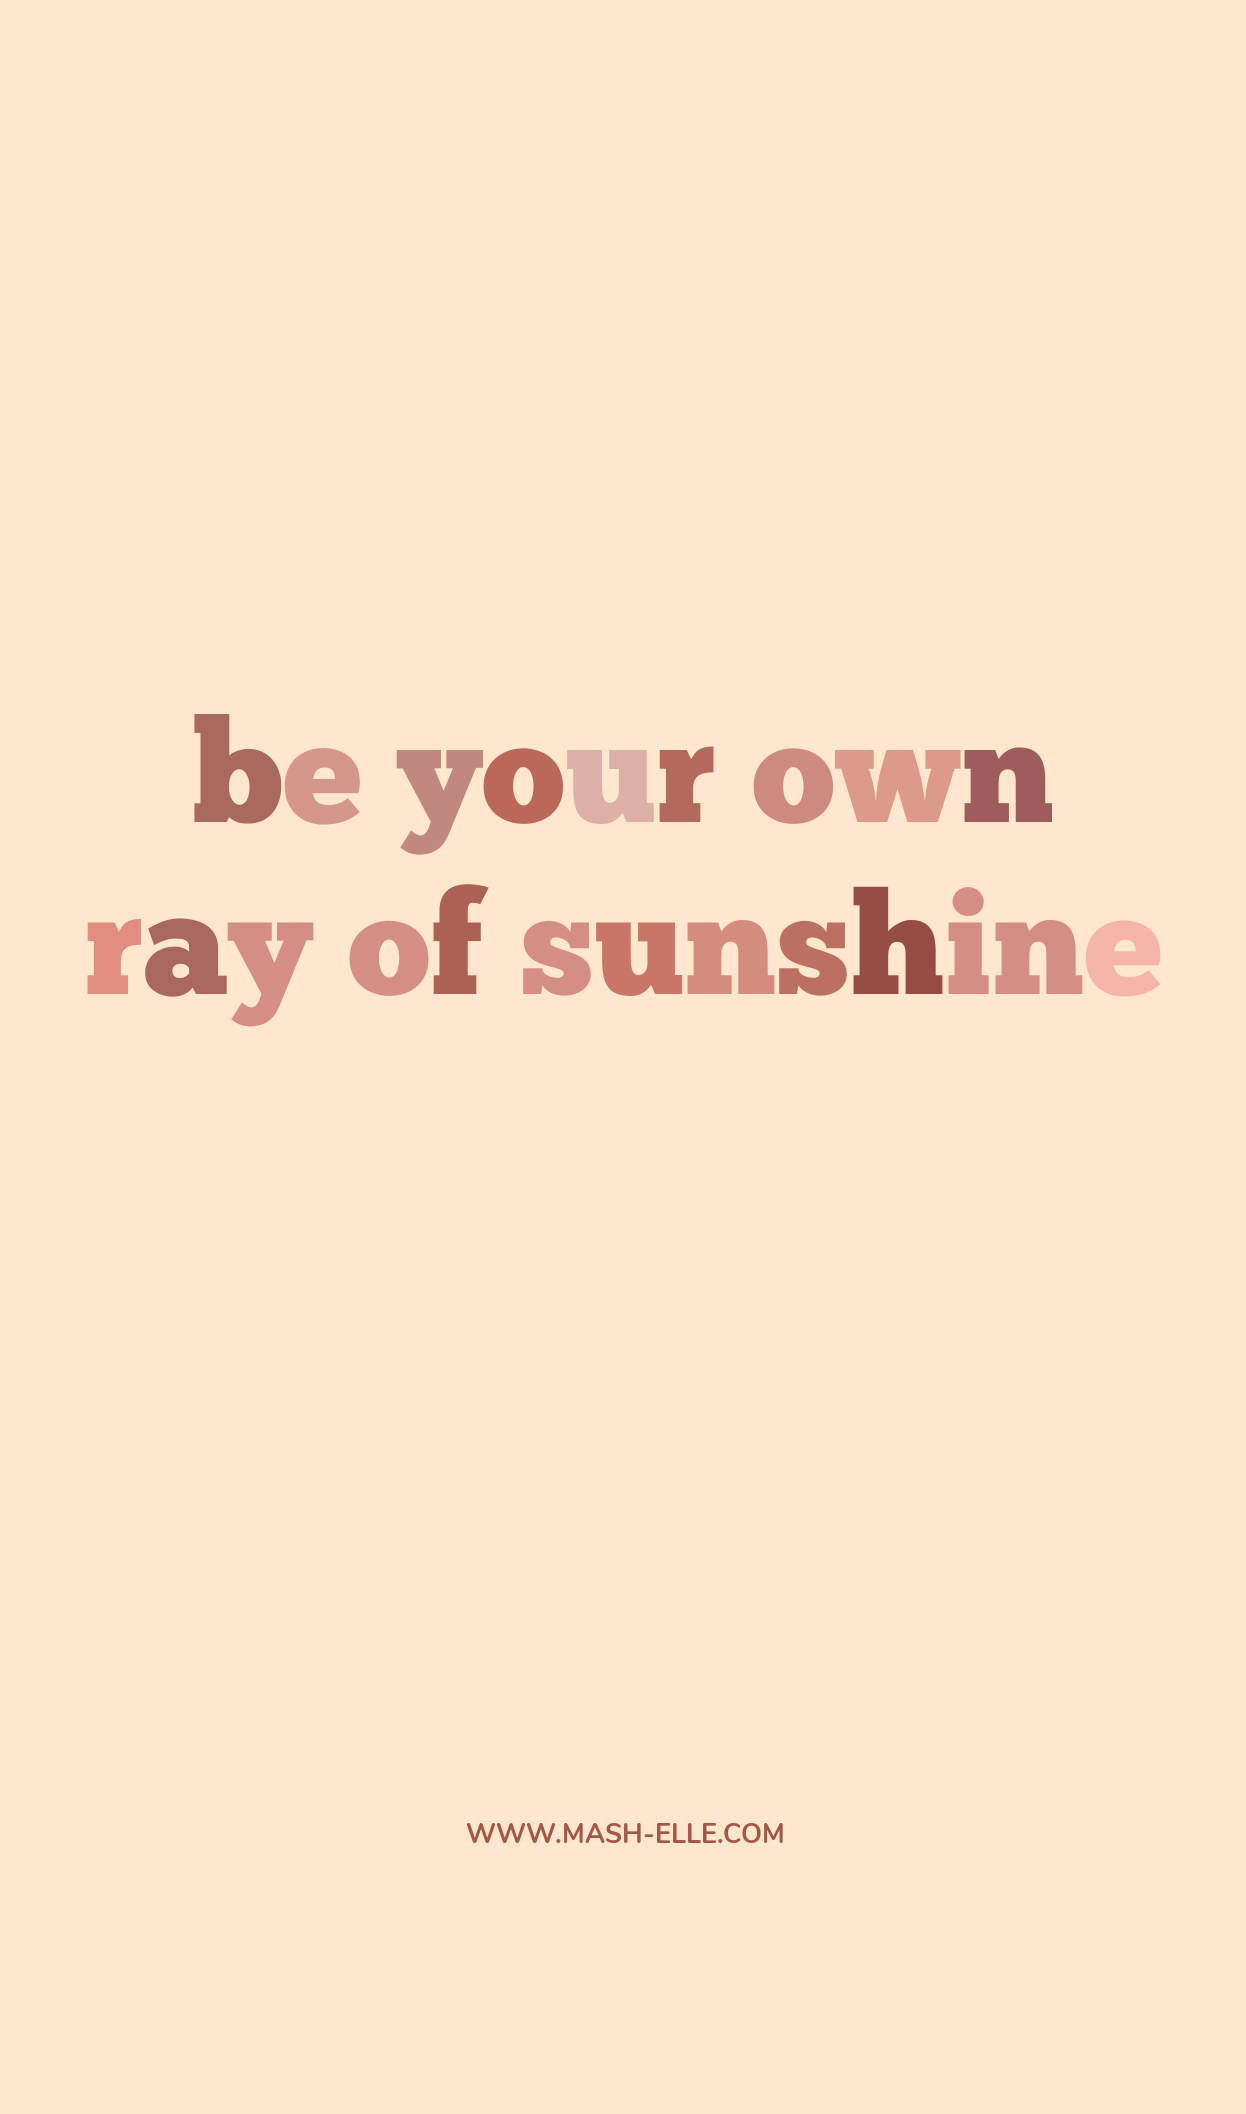 Be your own ray of sunshine - Positivity